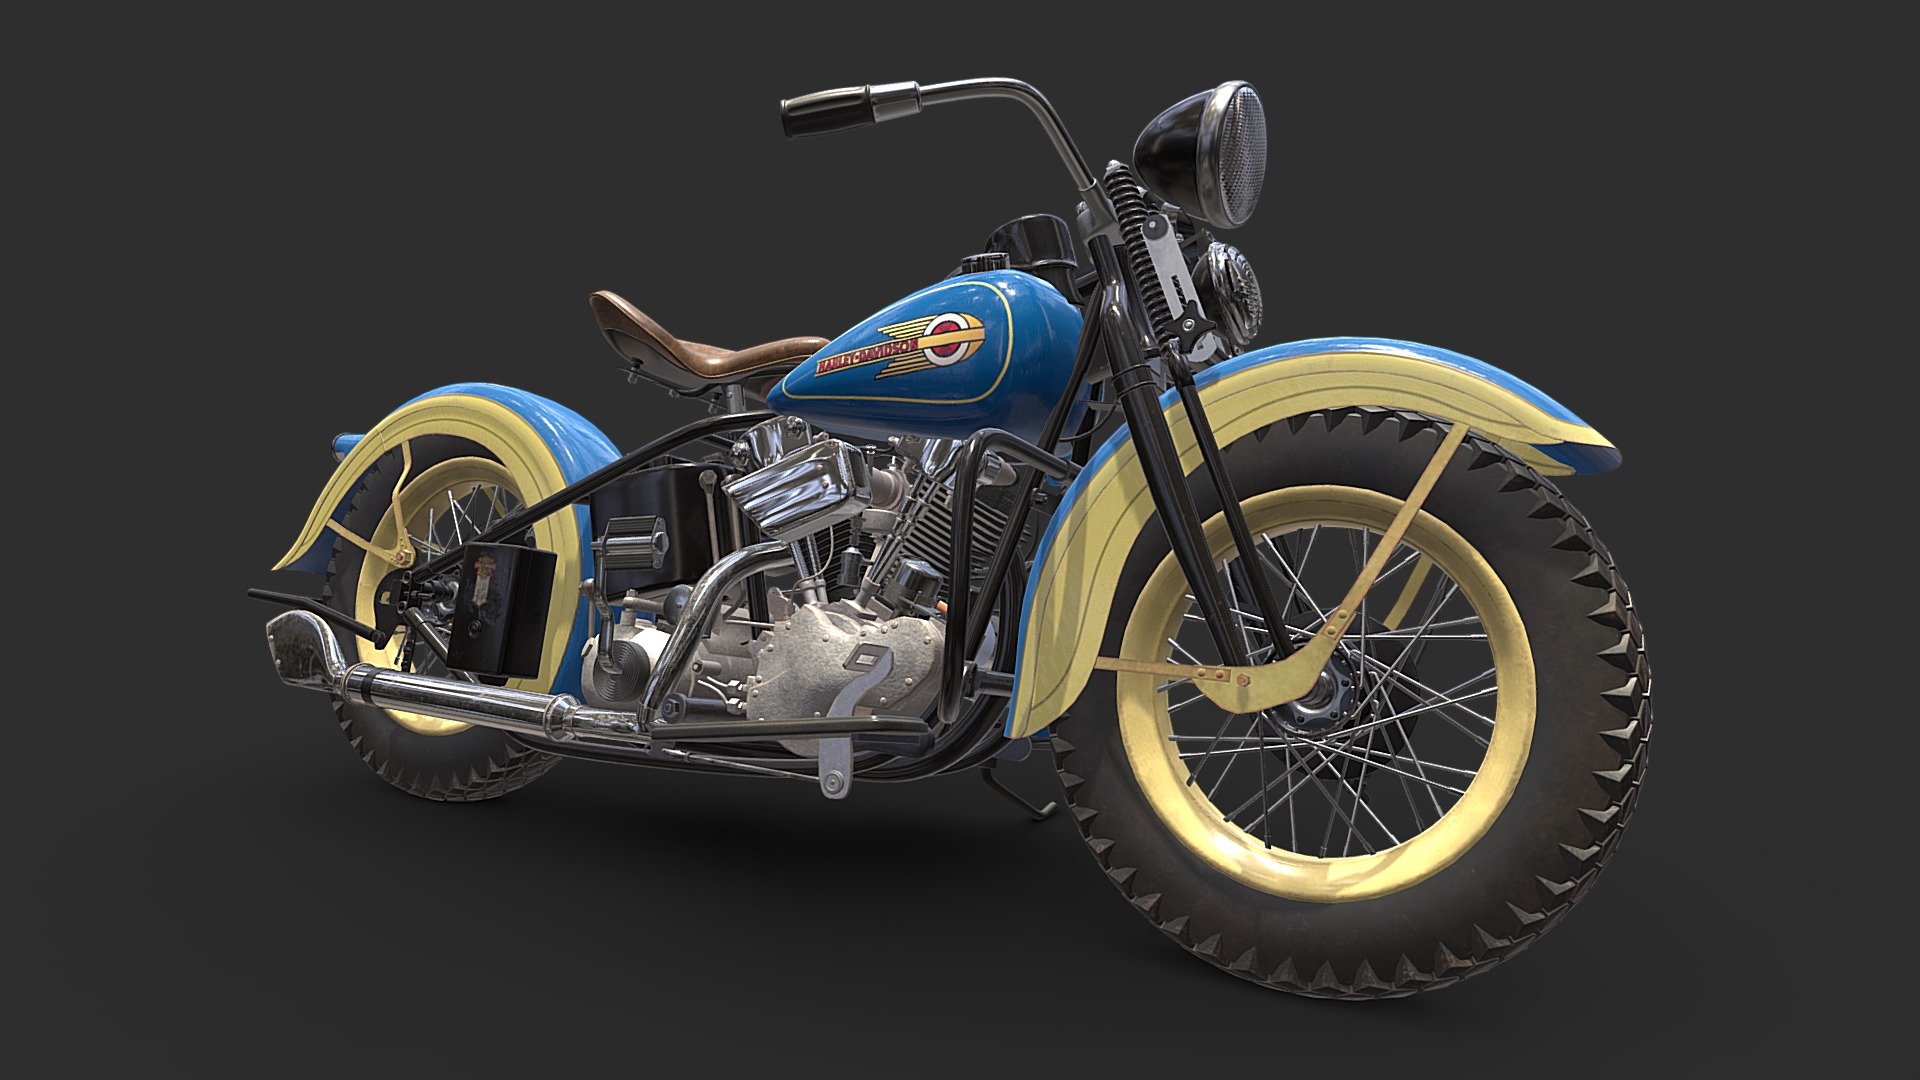 The 1936 Harley-Davidson Knucklehead is a classic American motorcycle known for its distinctive &ldquo;knucklehead